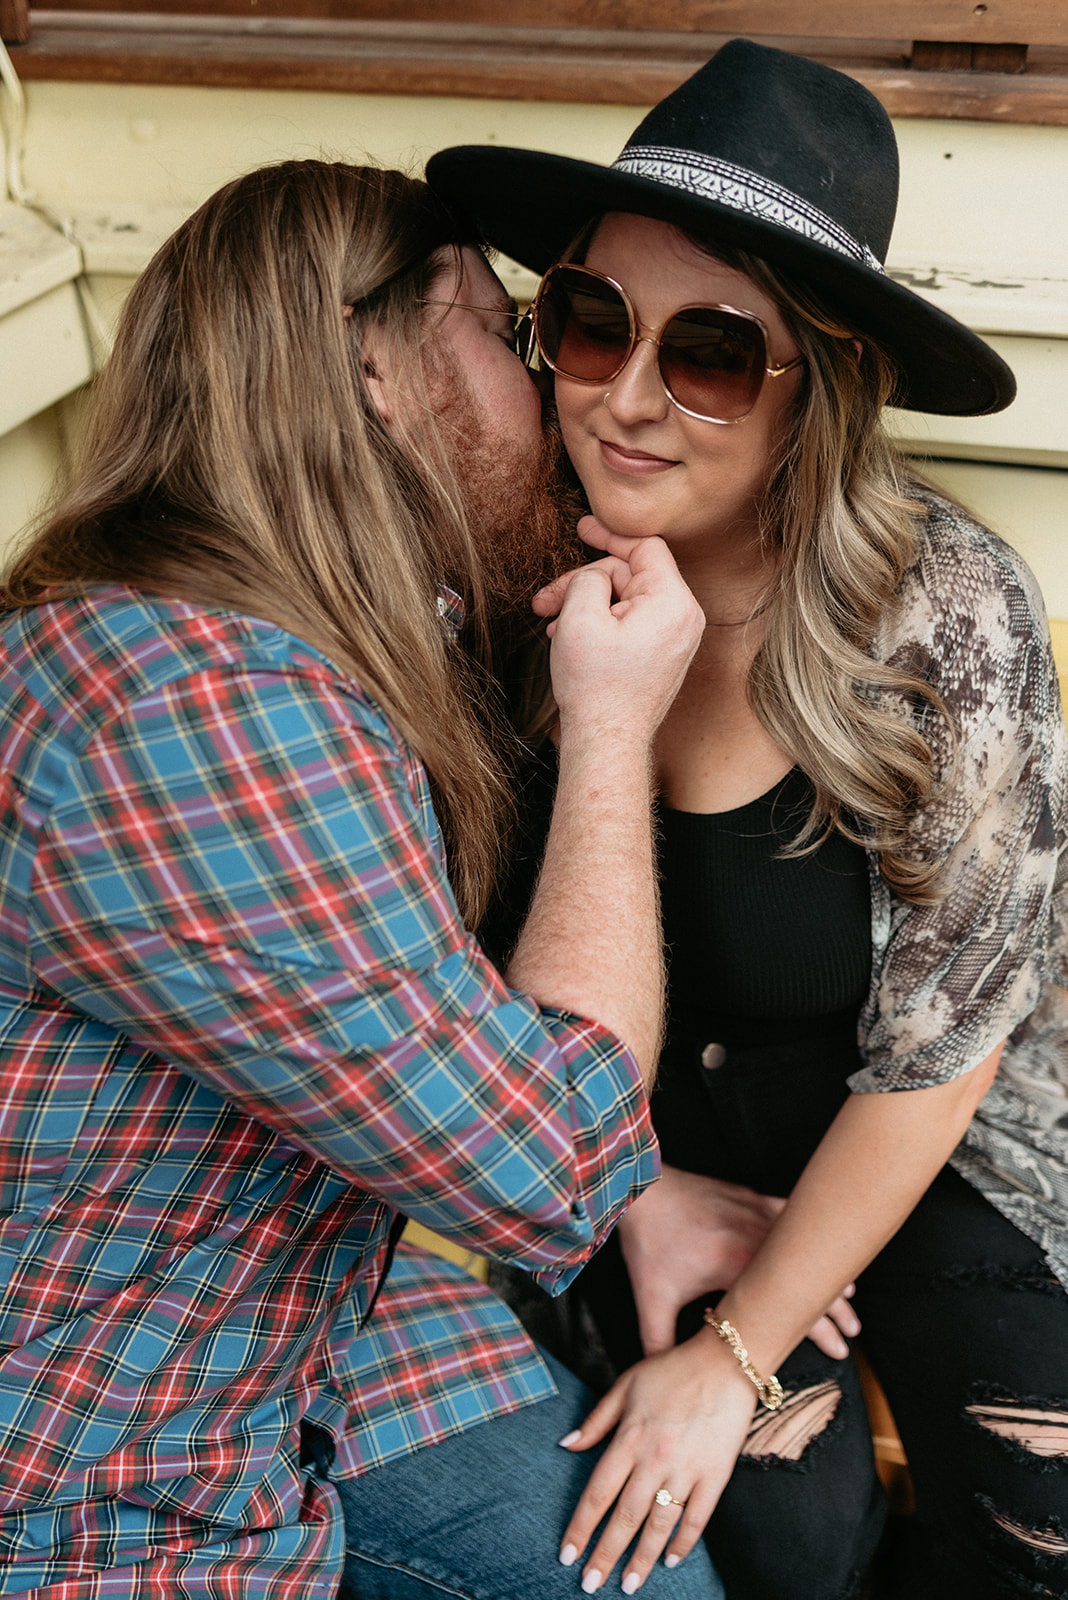 Woman sitting with sunglasses on while man kisses her cheek